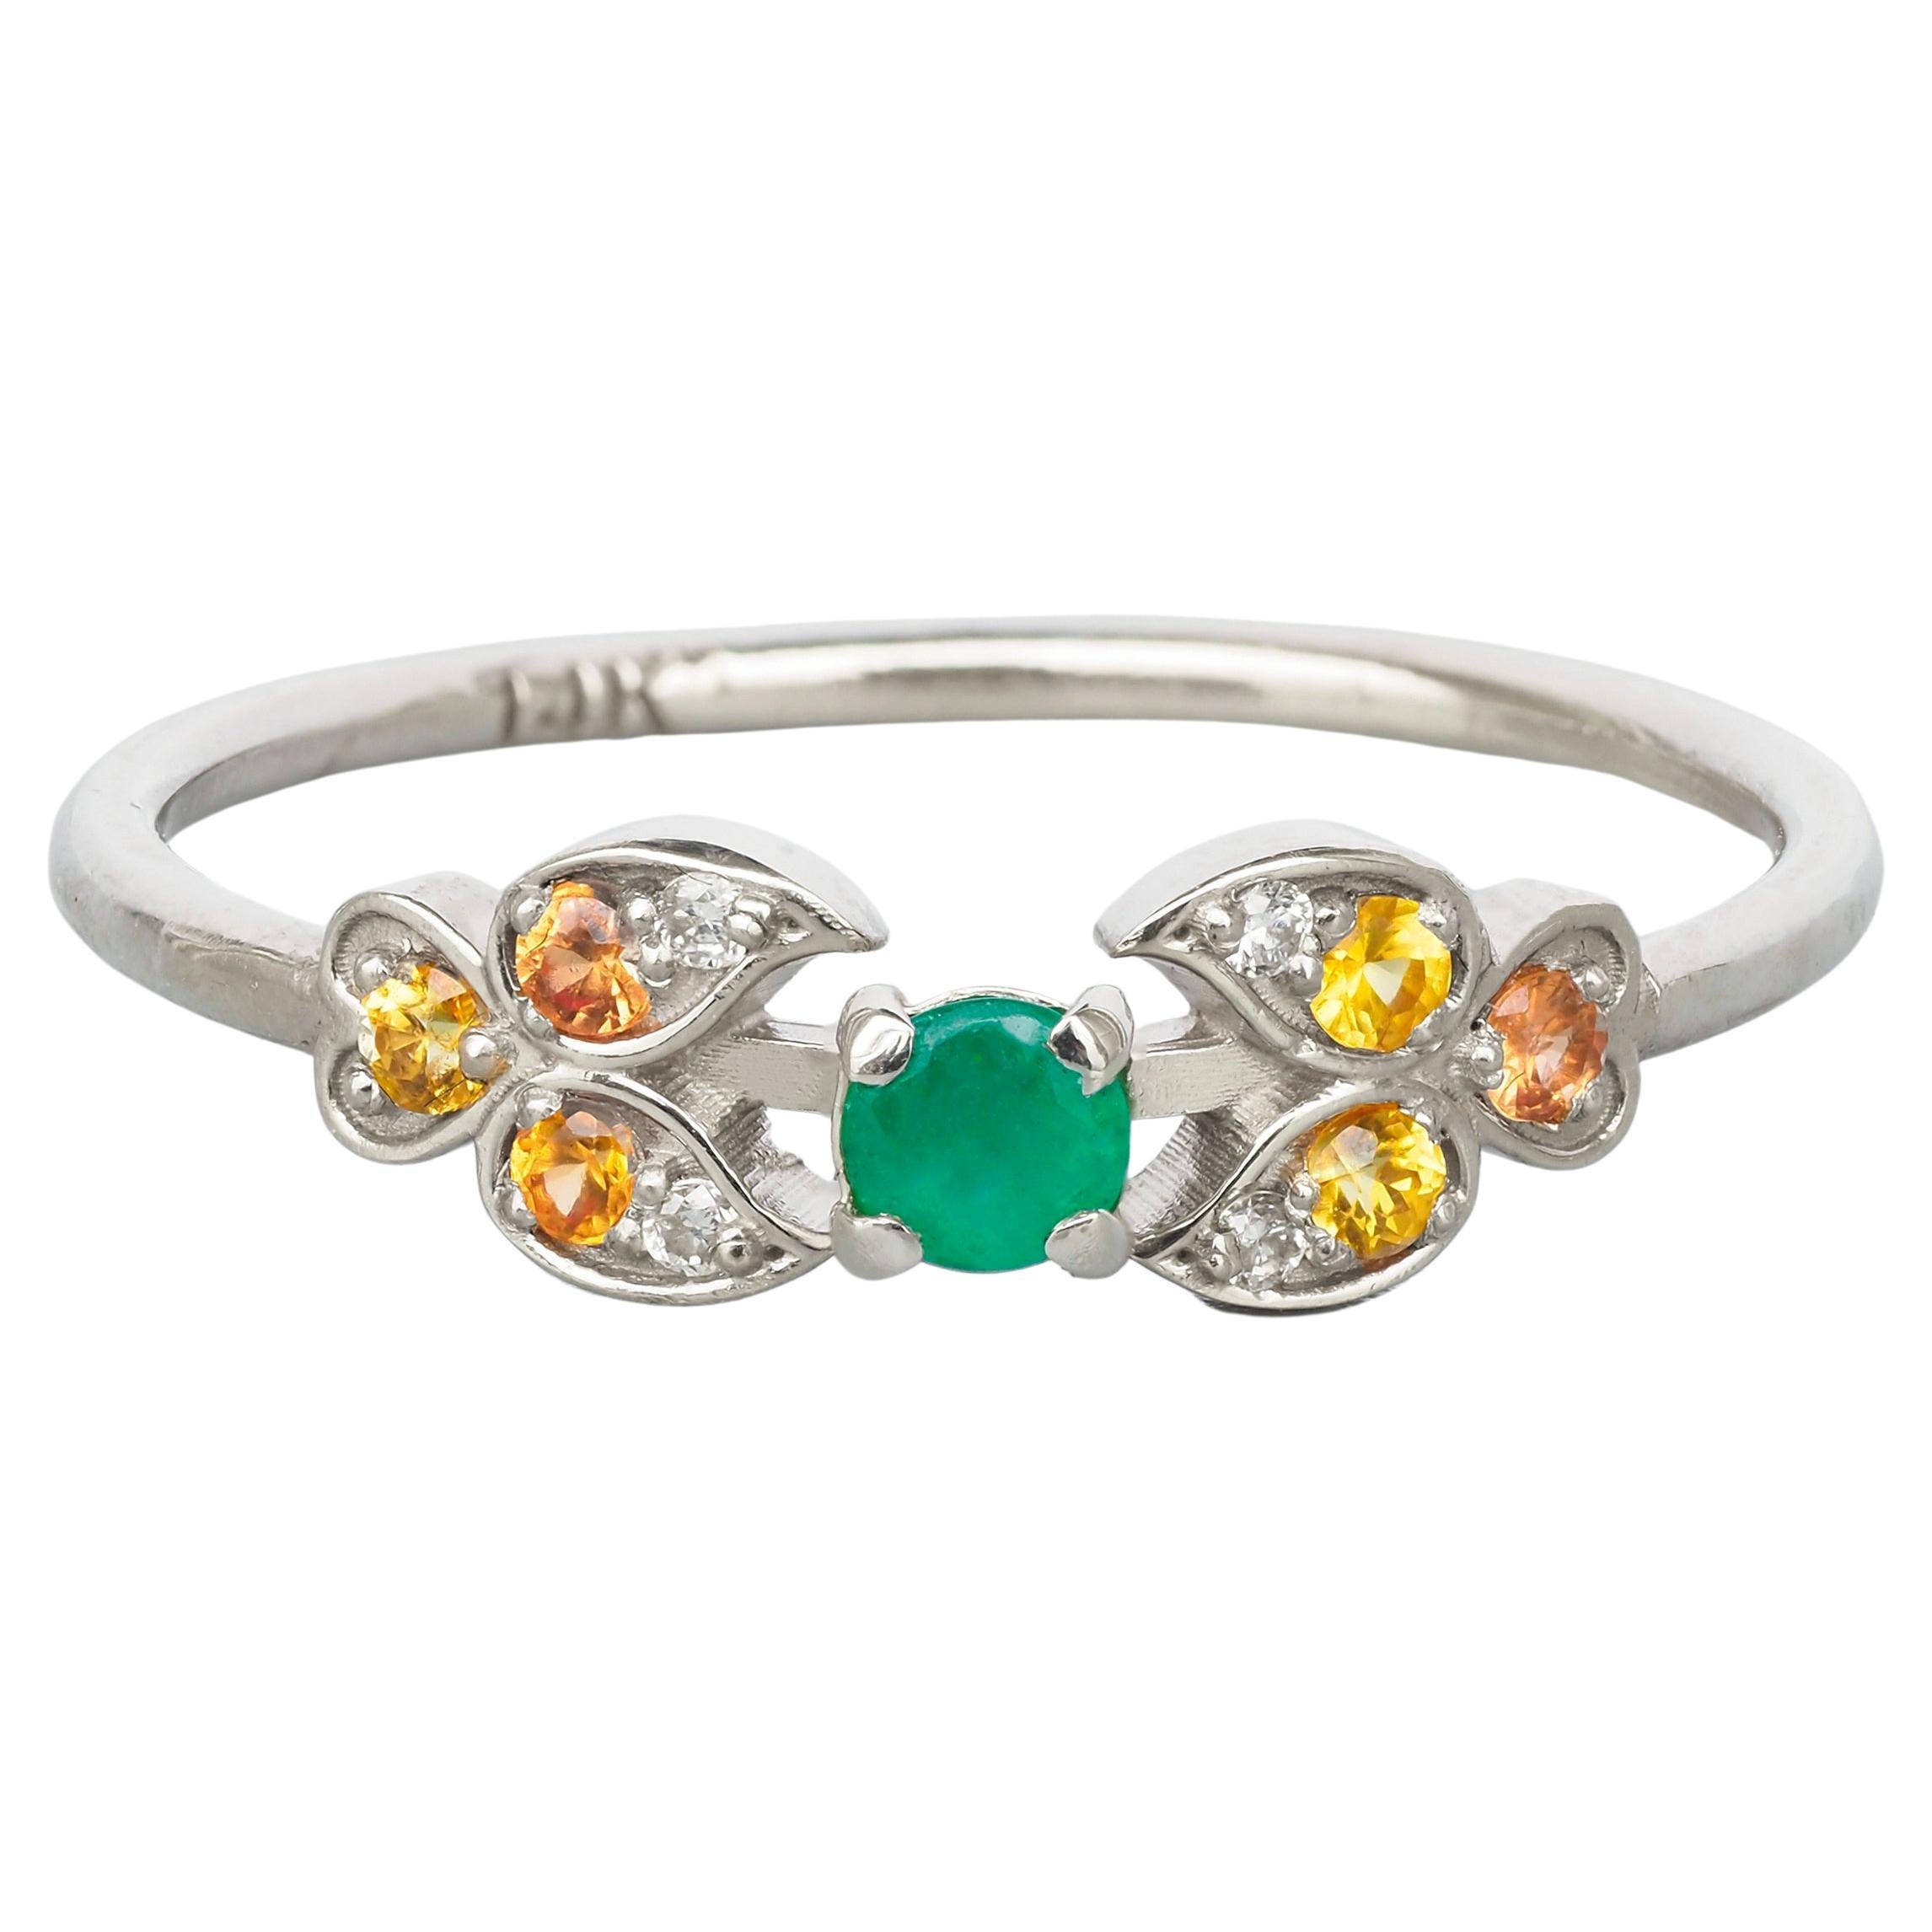 Emerald, Diamonds and Sapphires ring in 14k gold. Tiny ring